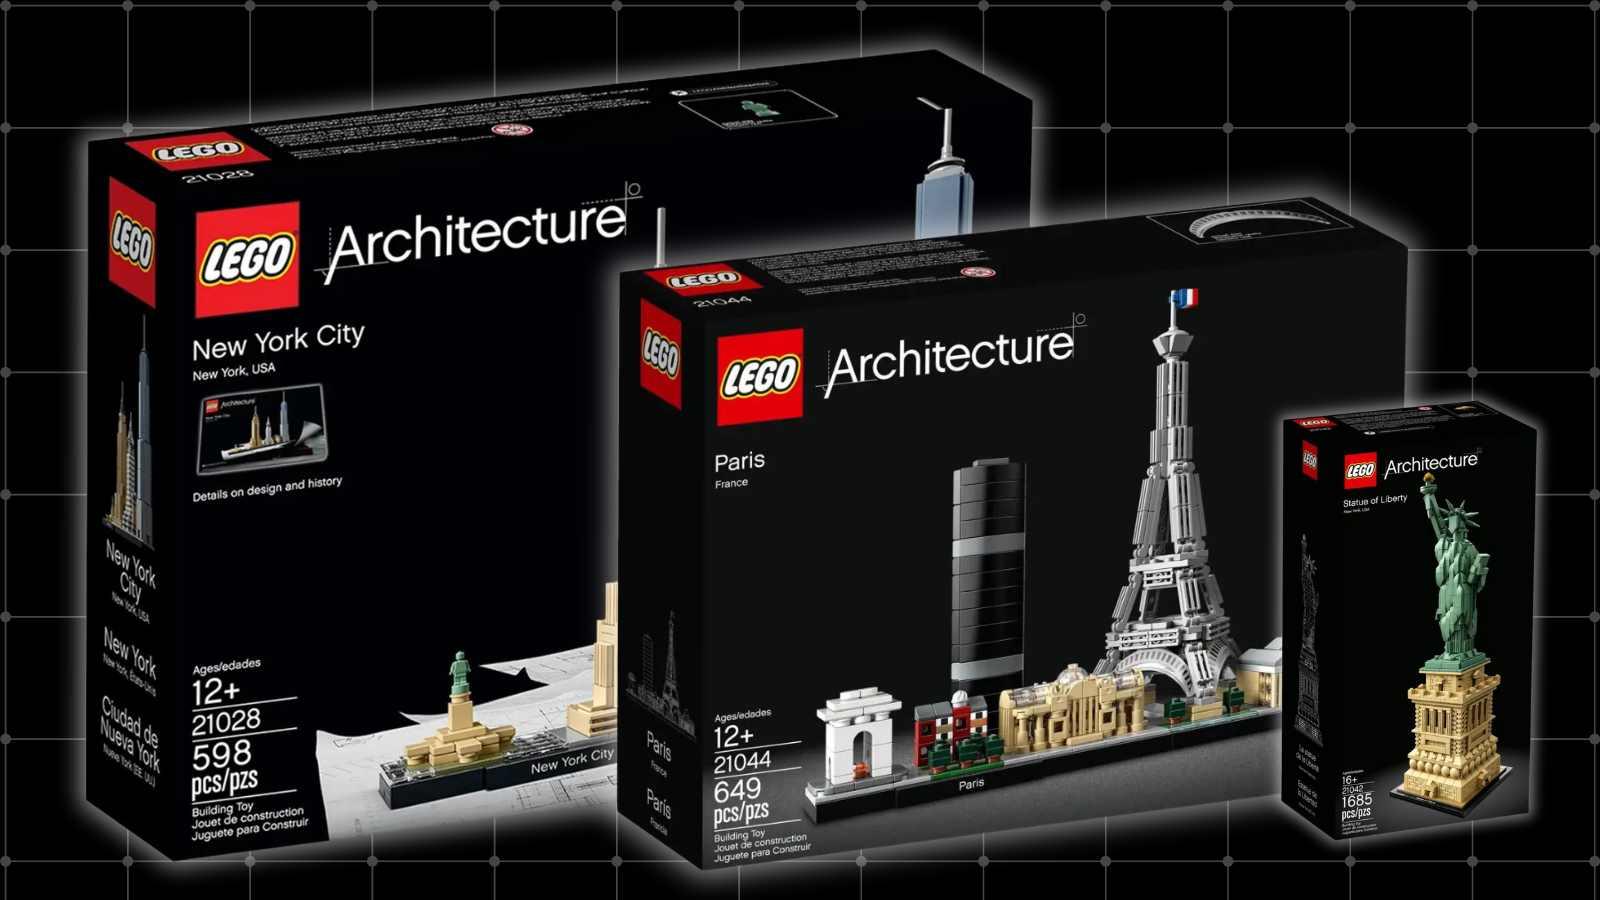 The LEGO Architecture sets discounted at Amazon